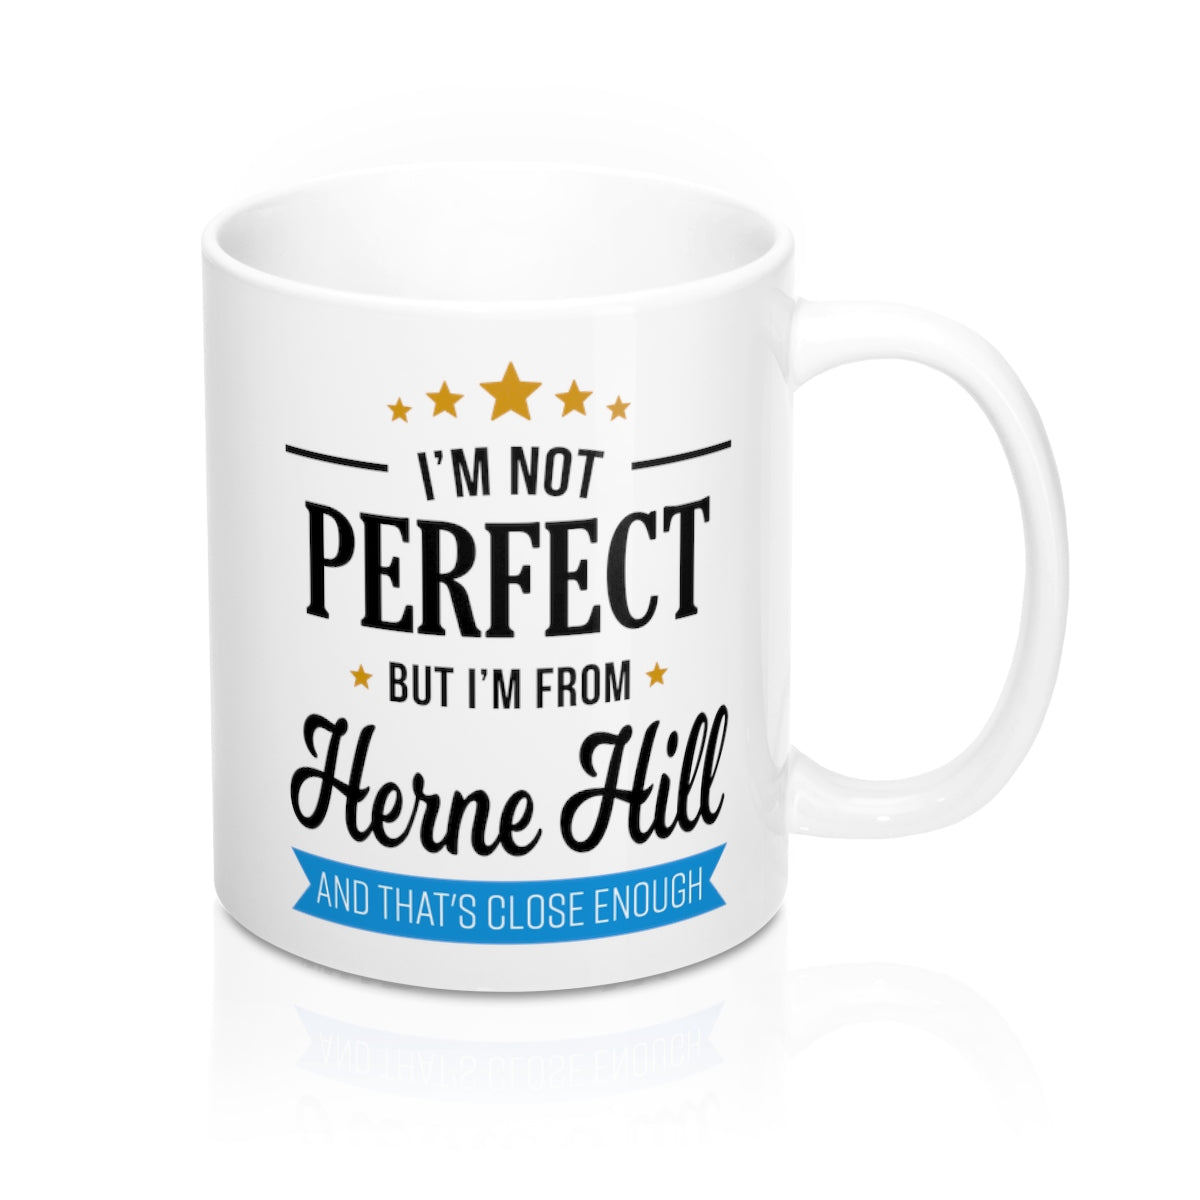 I'm Not Perfect But I'm From Herne Hill Mug